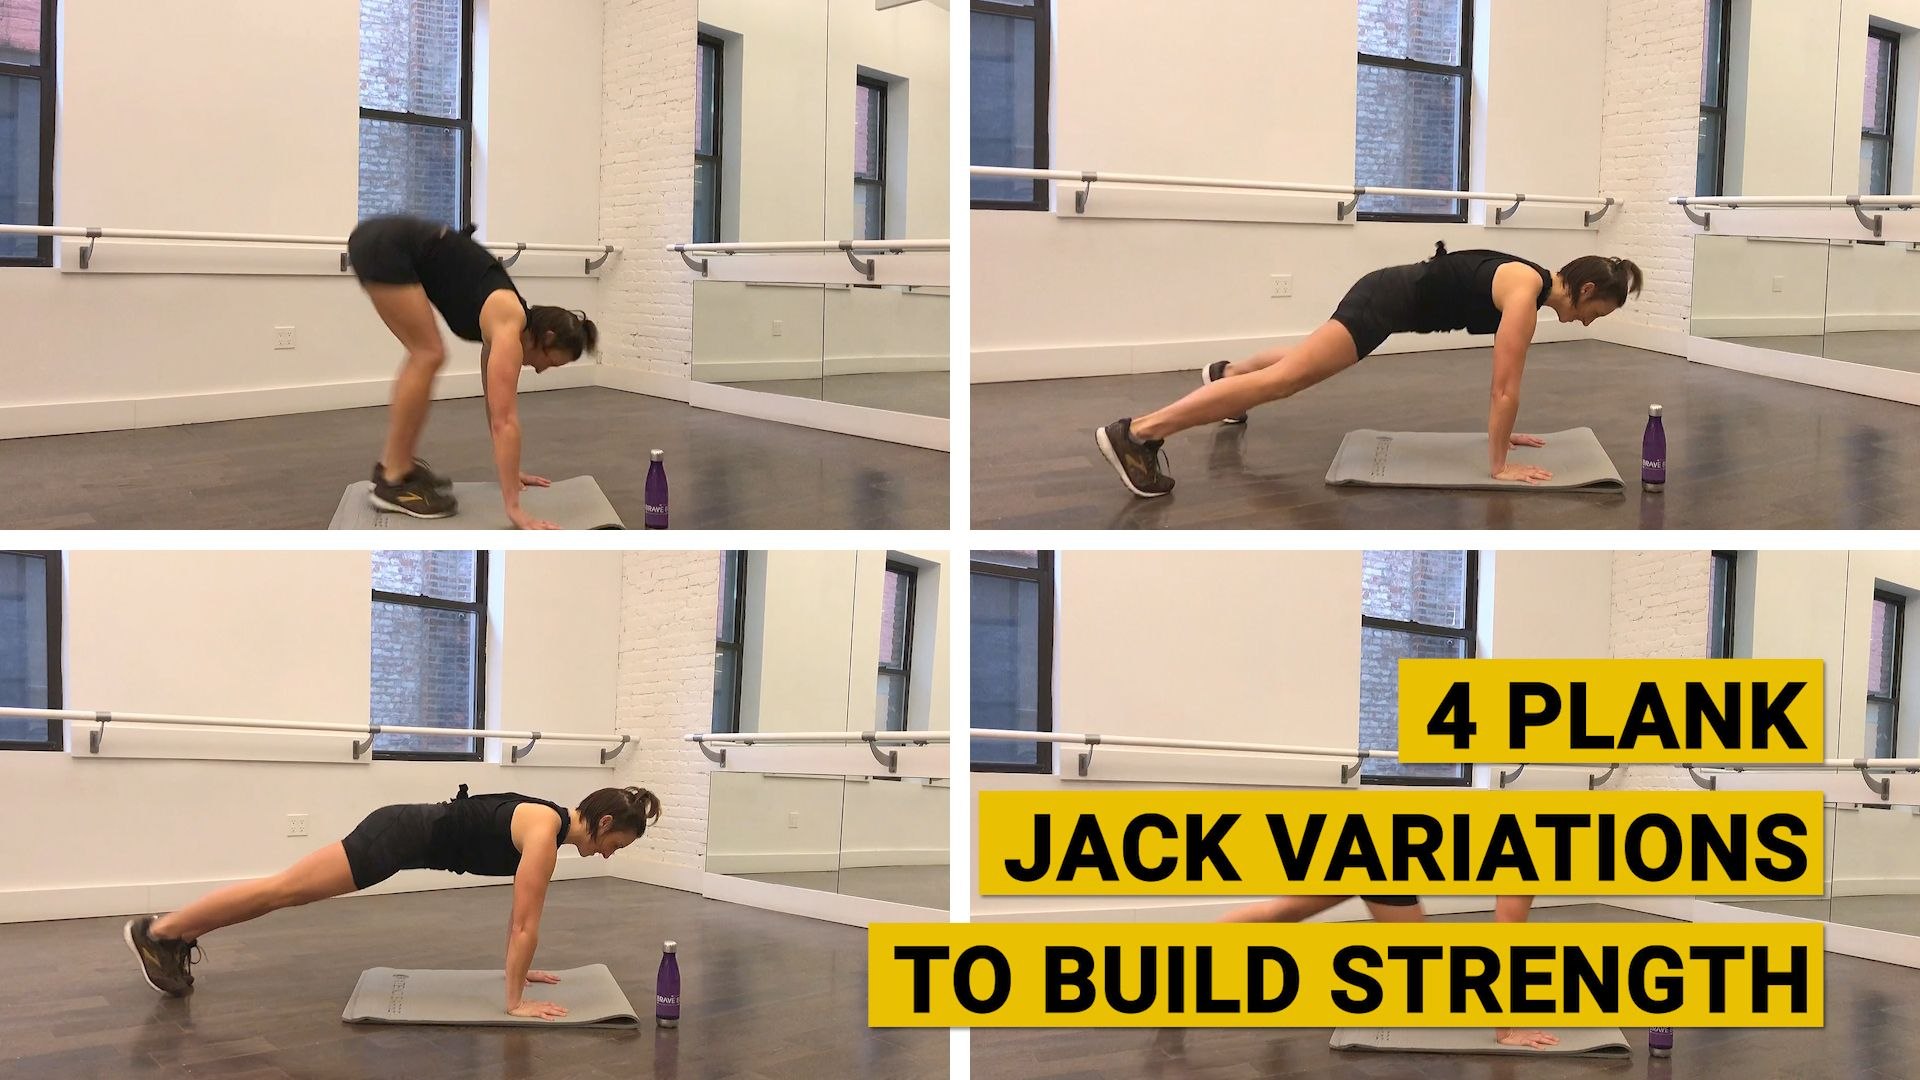 4 Plank Jack Variations to Build Strength and Stability - video Dailymotion